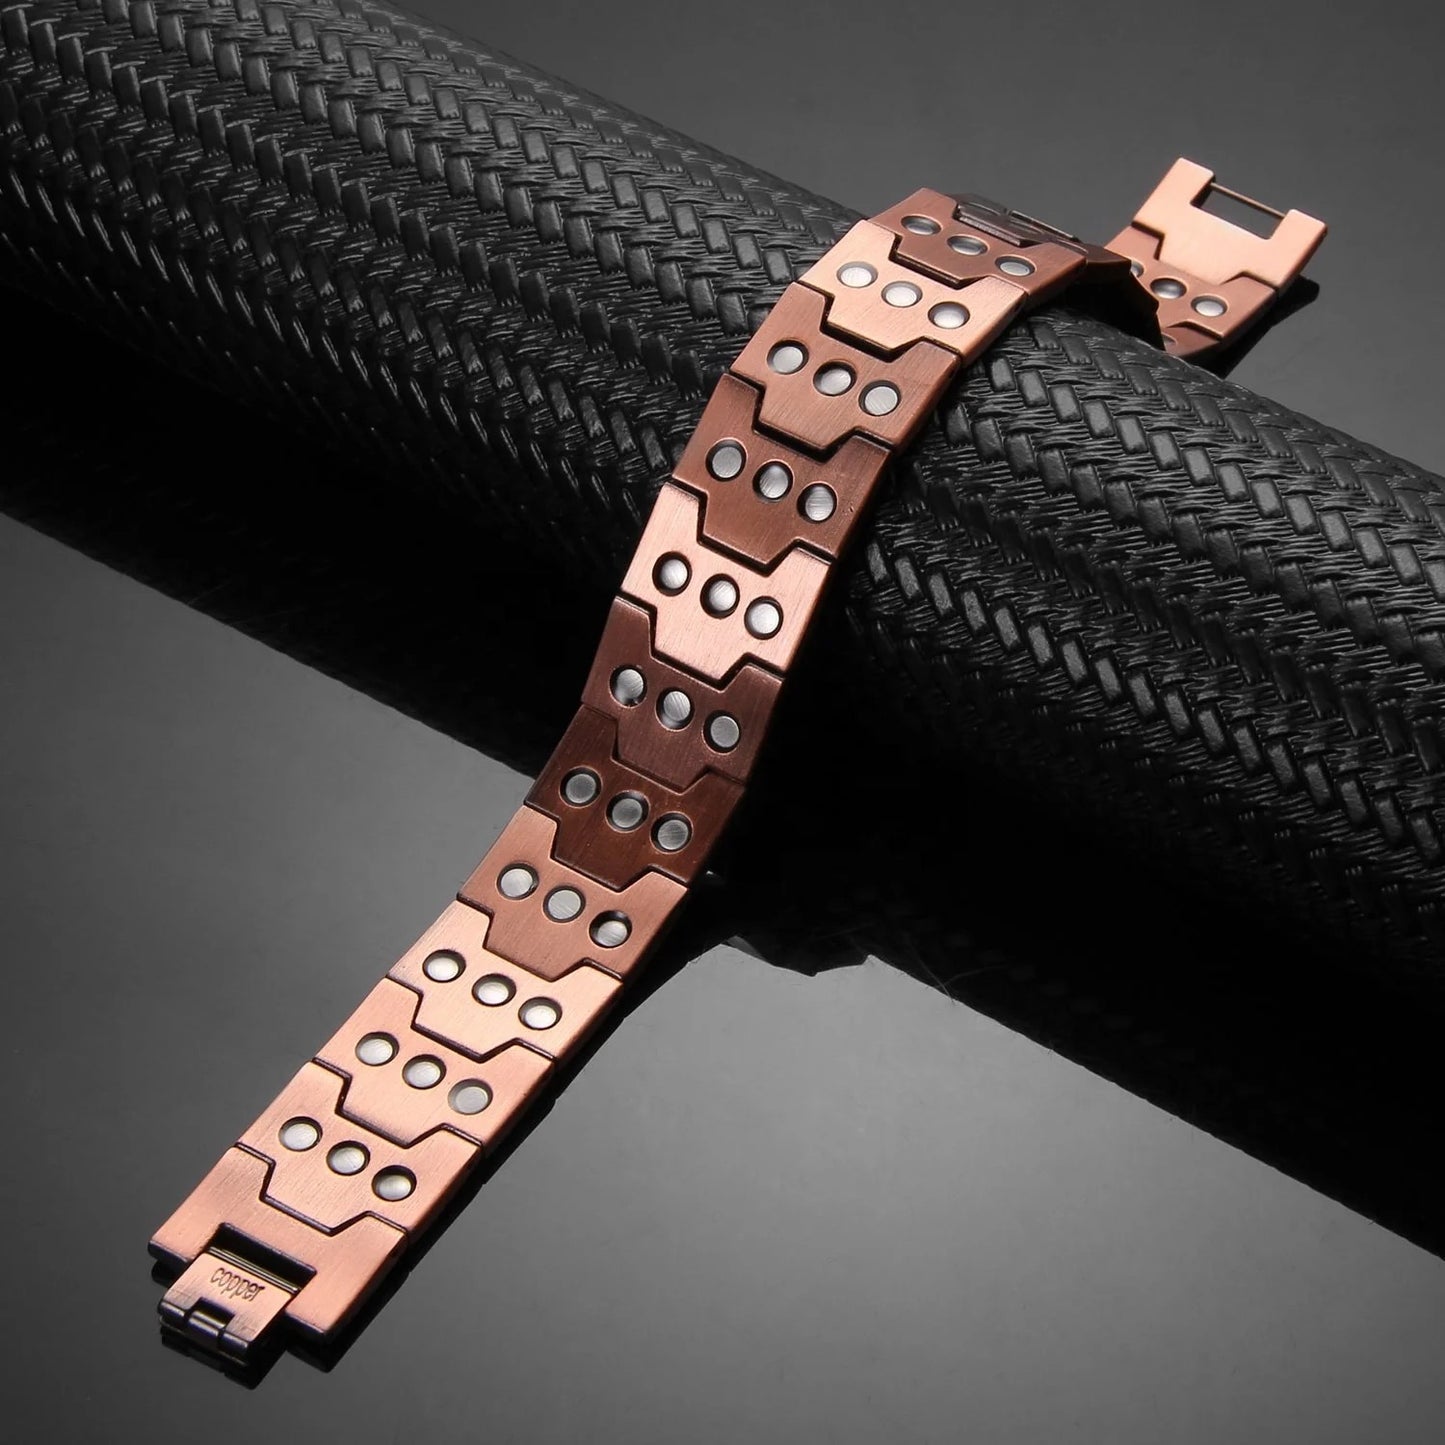 CLM001 100% Solid Pure Copper Magnetic Bracelet Linked 48 mags 'Tire'